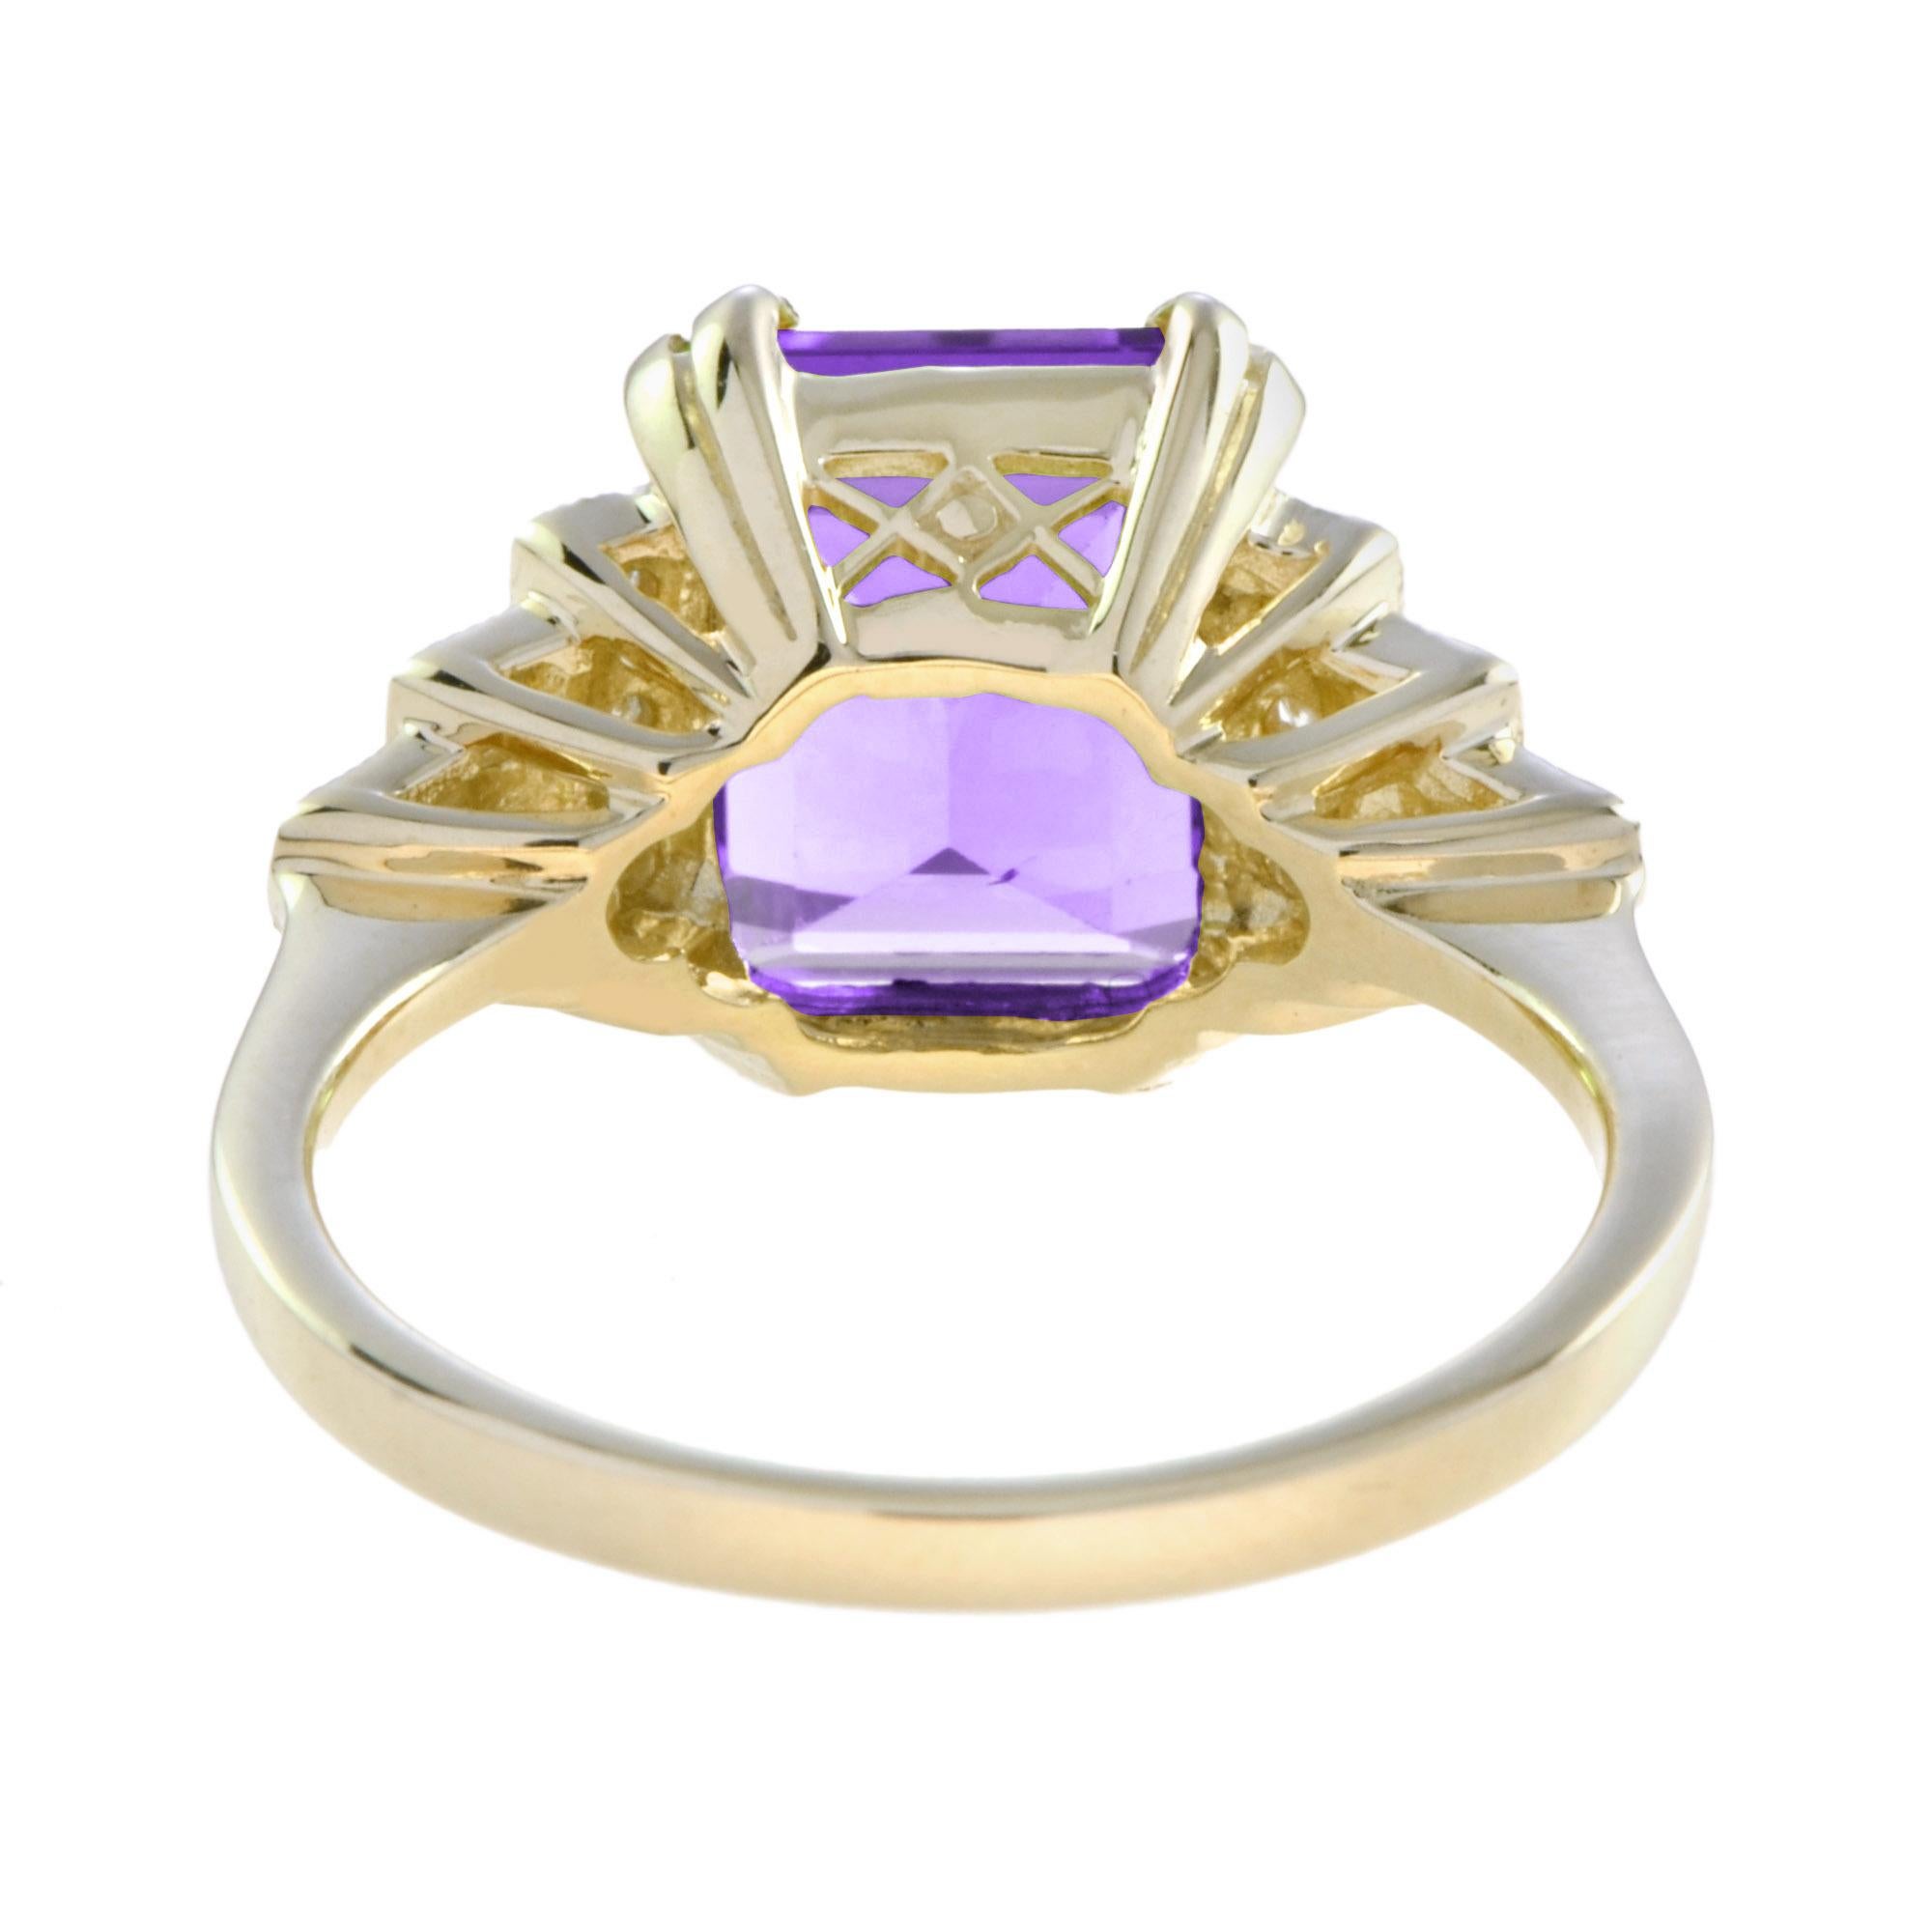 For Sale:  Emerald Cut Amethyst and Diamond Step Shoulder Engagement Ring in 14K Gold 5